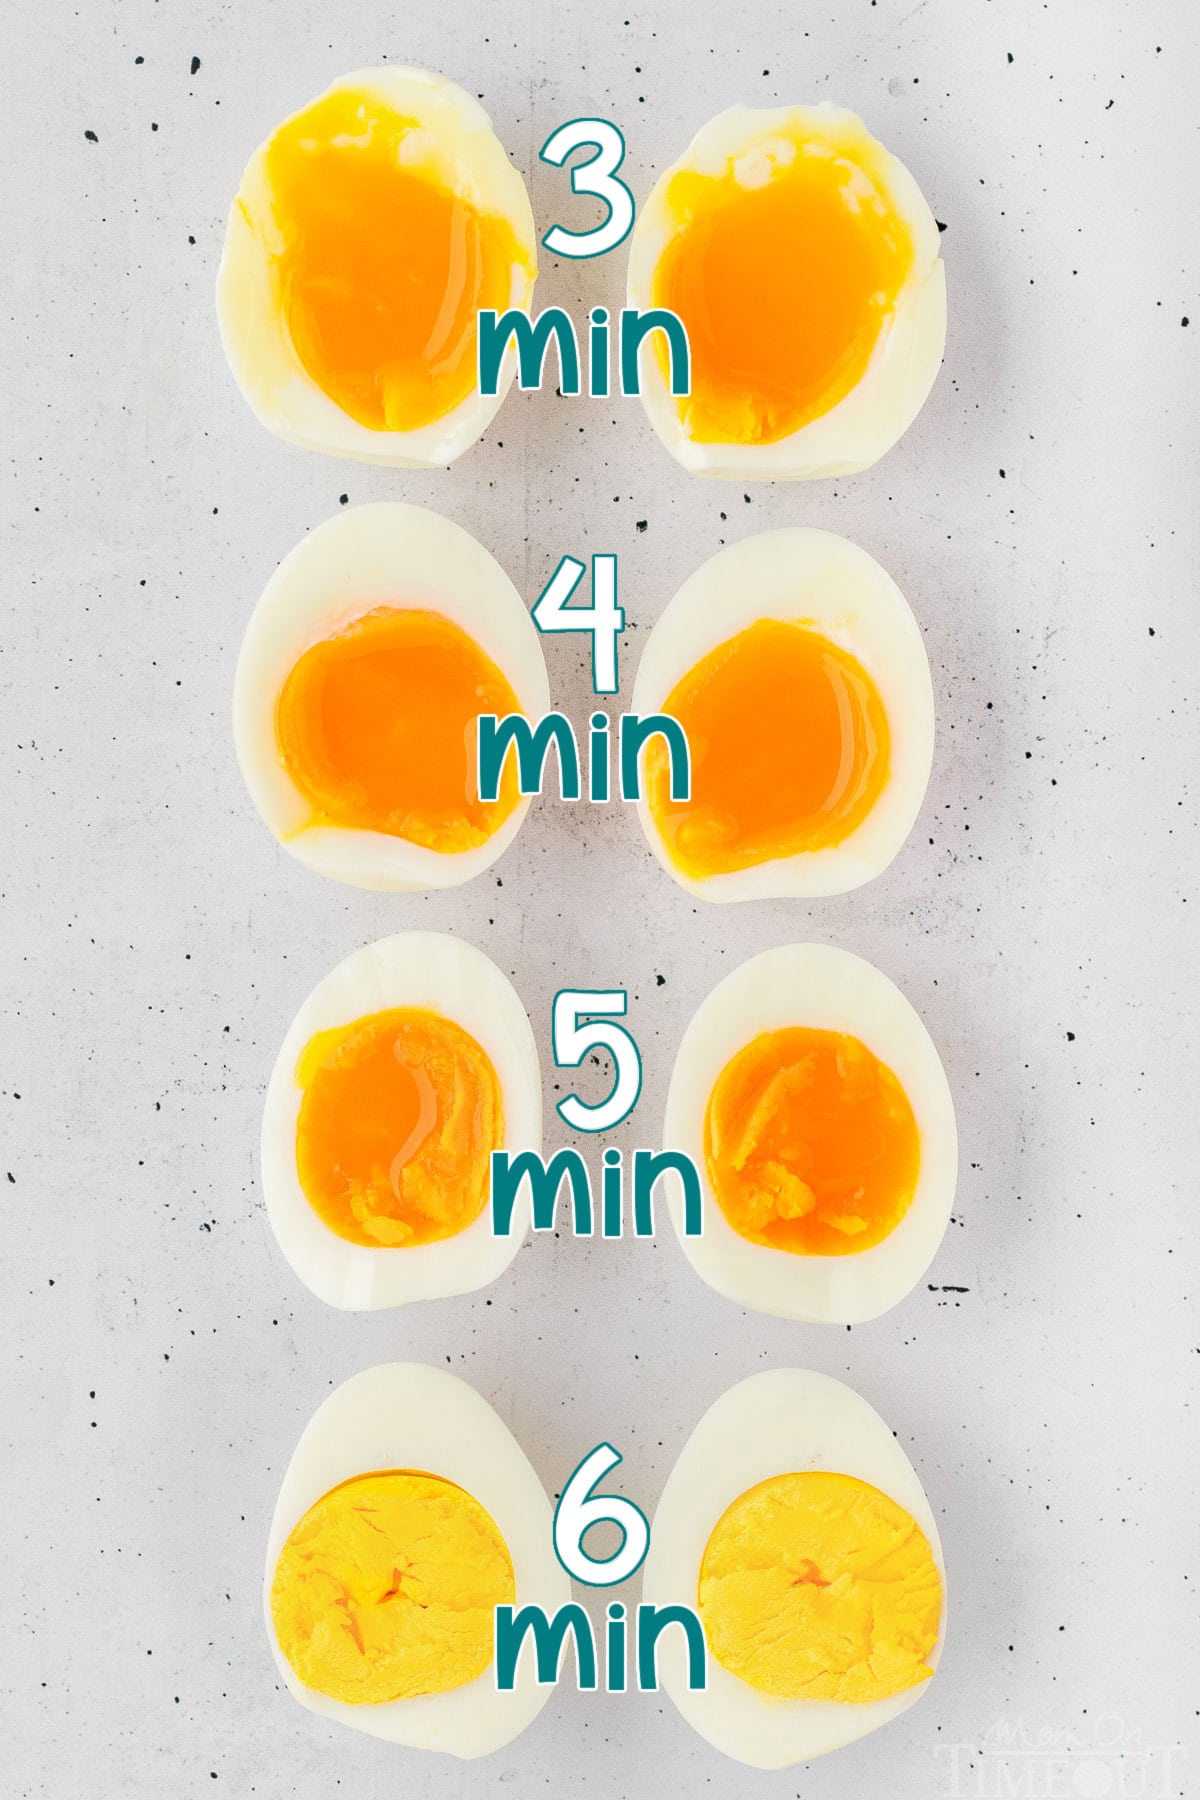 Hard boiled eggs cut in half, showing the texture of each egg after different cooking times.